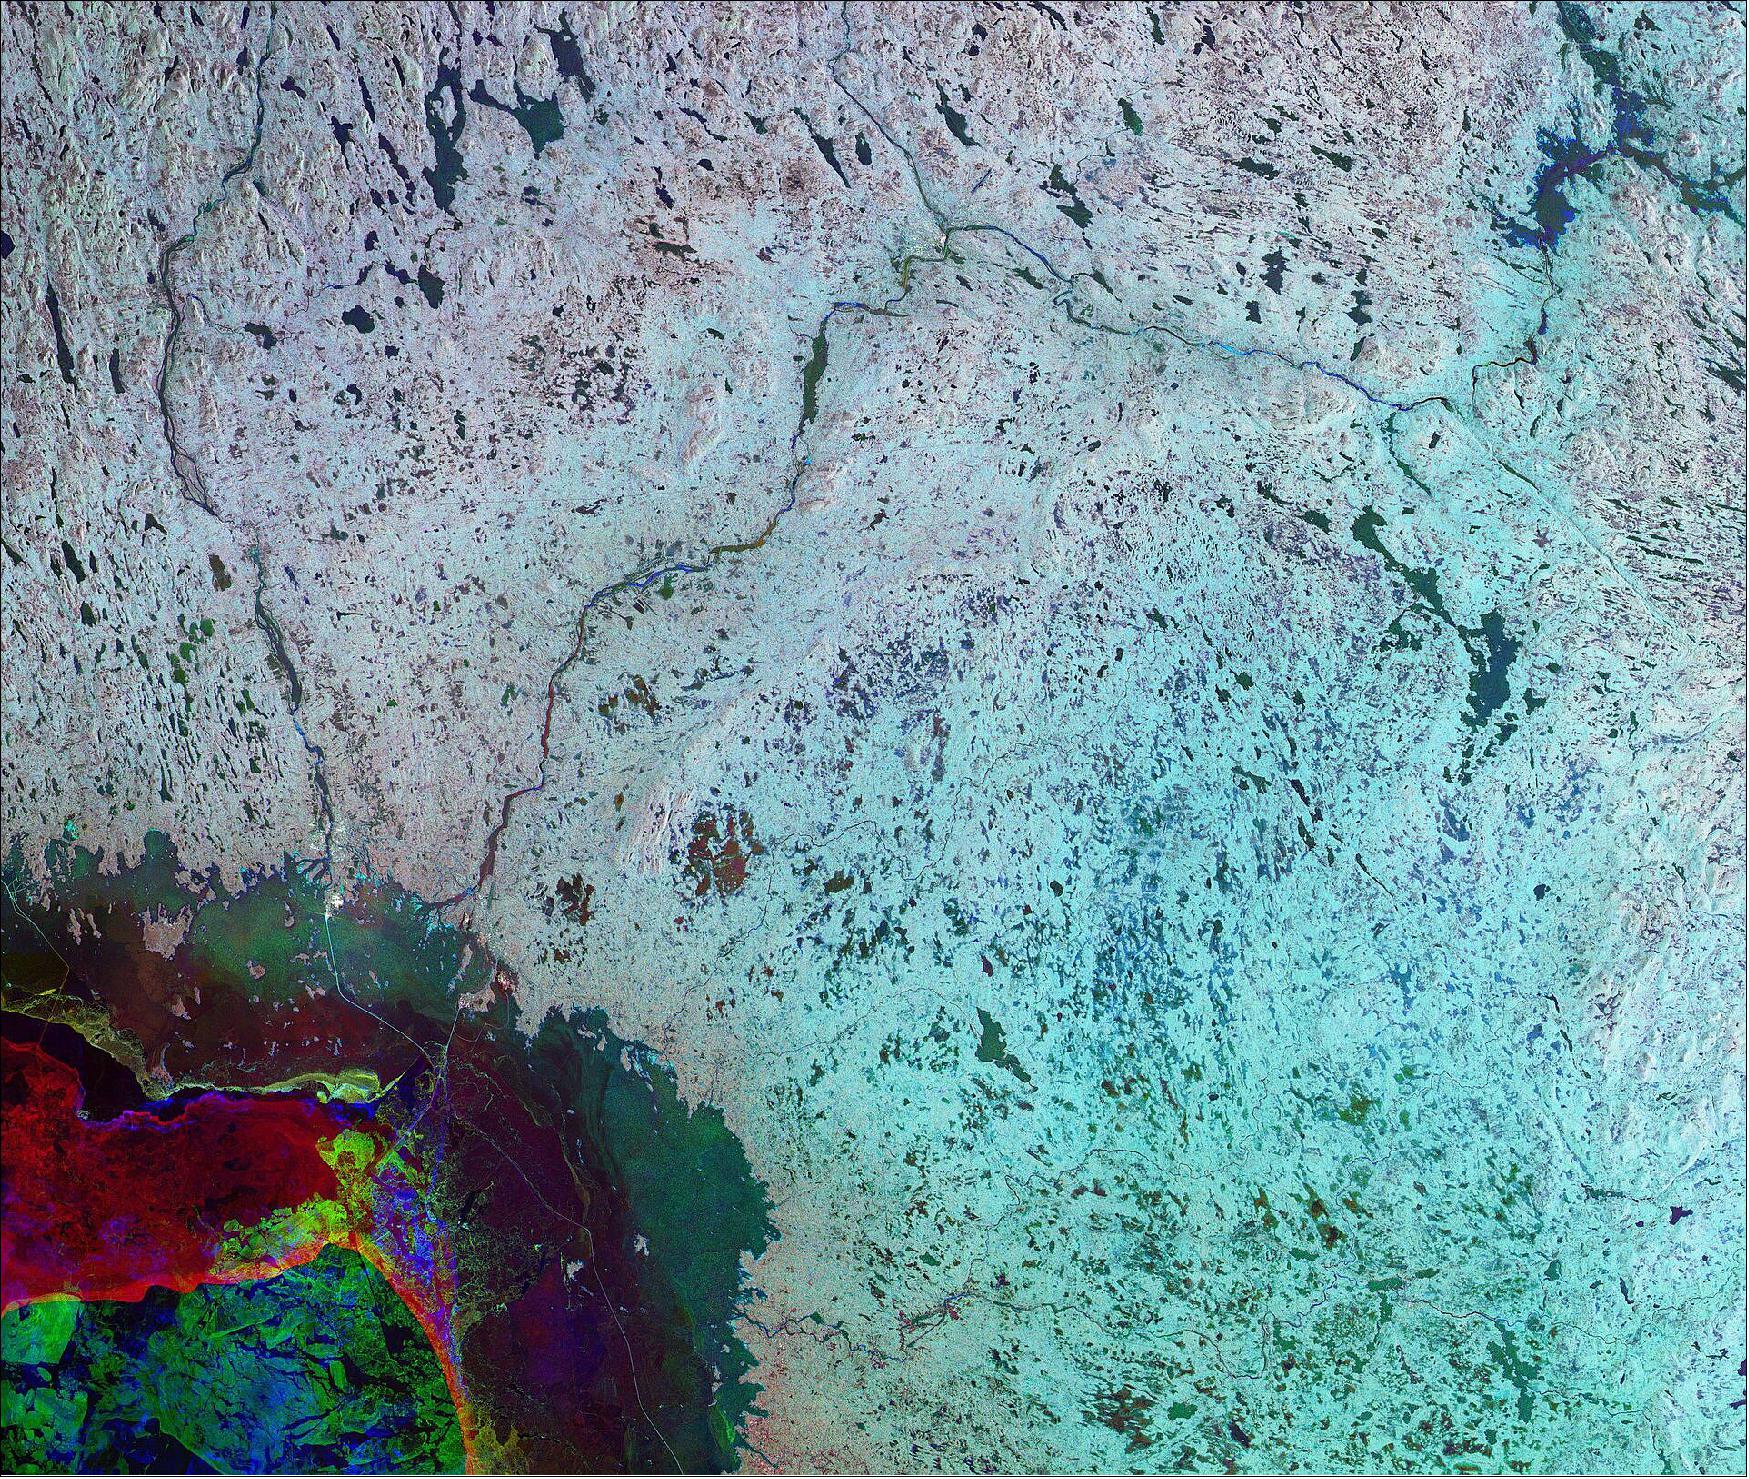 Figure 1: This image combines three radar acquisitions from the Copernicus Sentinel-1 mission to show changes in land conditions over time. The first image from 28 February 2019 is associated with green, the second from 11 March is linked to red, and the third from 04 April depicts changes in blue. The changes that took place over time in this image are largely seen in the bottom-left of the image, where sea ice in the Gulf of Bothnia has shifted substantially along the coast. The Gulf of Bothnia, the northernmost arm of the Baltic Sea, is situated between Finland’s west coast and Sweden’s east coast. As it receives the water of so many rivers, including the Torne and Kemijoki rivers visible in the image, its salinity is extremely low, and ice cover is maintained for up to five months during the winter. There are many small islands, making navigation in the gulf difficult. For this reason, vessels travelling in the gulf receive icebreaker assistance on their journey in the ice-covered waters, and follow the straight lines easing their navigation. Straight lines can be seen coming from the Port of Röyttä and the Port of Ajos. This image is also featured on the Earth from Space video program (image credit: ESA, the image contains modified Copernicus Sentinel data (2019), processed by ESA, CC BY-SA 3.0 IGO)